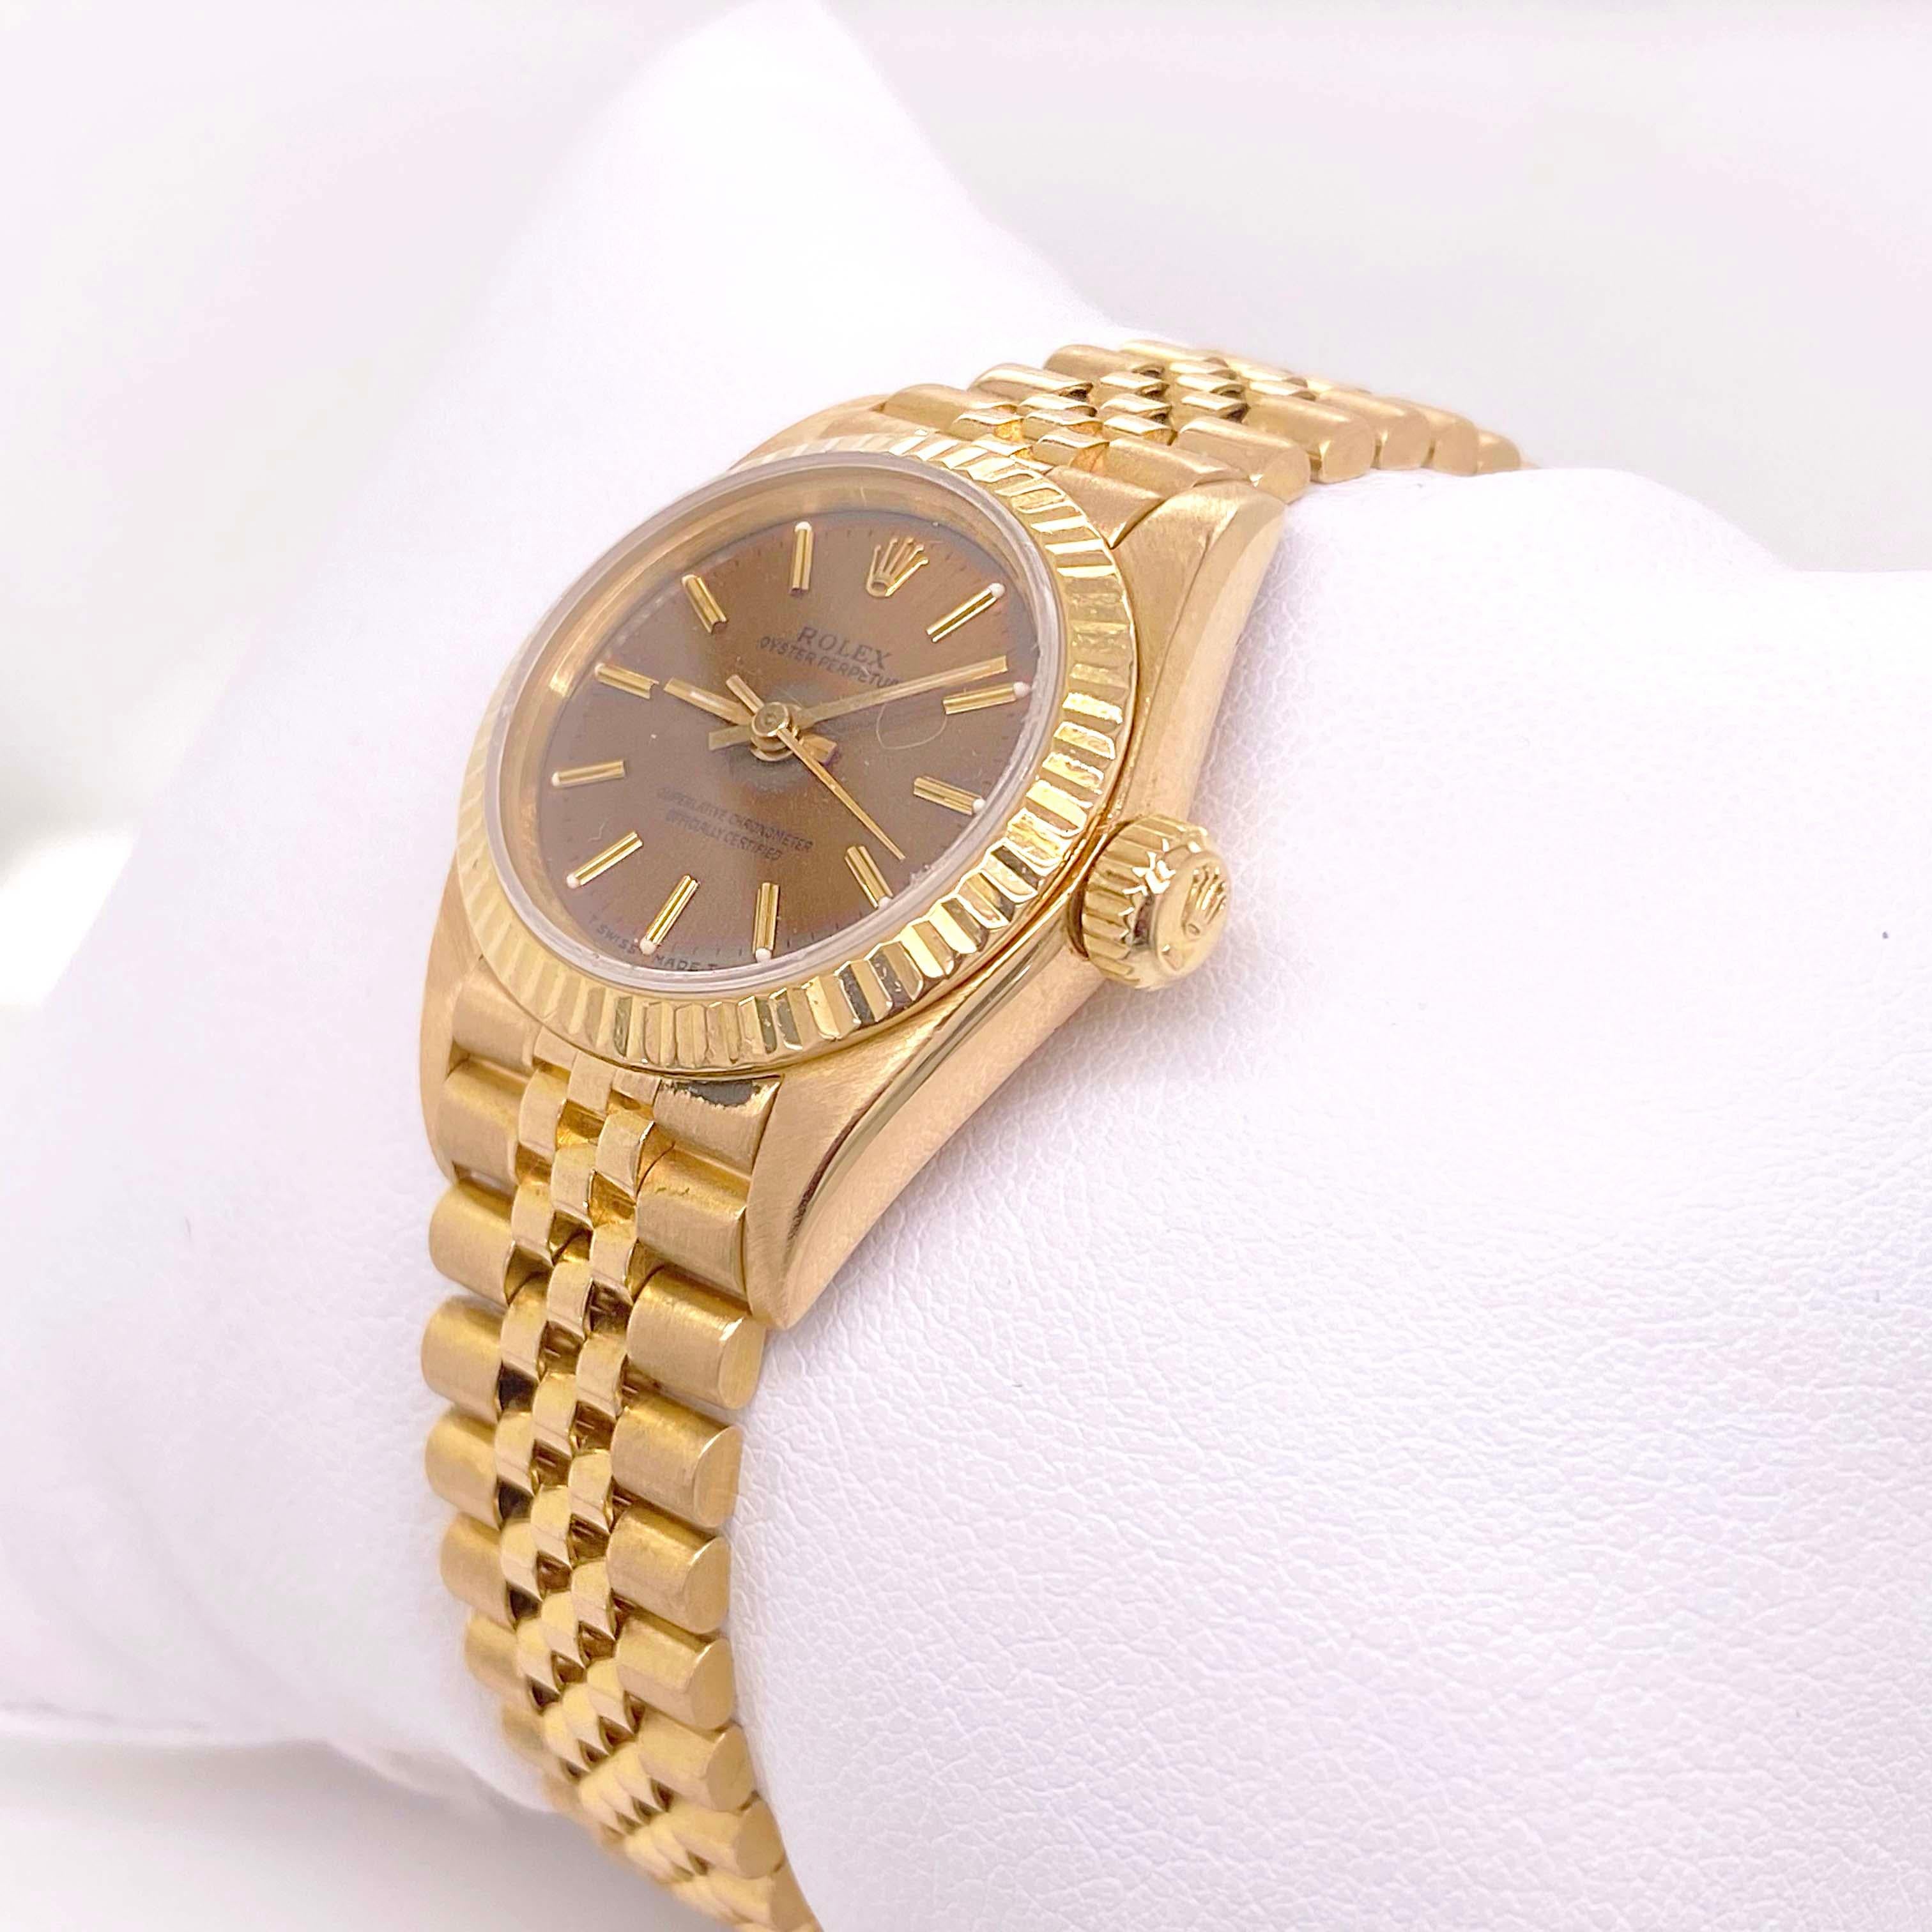 Rolex President in 18 karat yellow gold case, band, with an oyster perpetual movement. This stunning Rolex was made in 1989 and is in fantastic condition! With a 18k yellow gold fluted dial, the solid gold Rolex watch looks good with all attire on